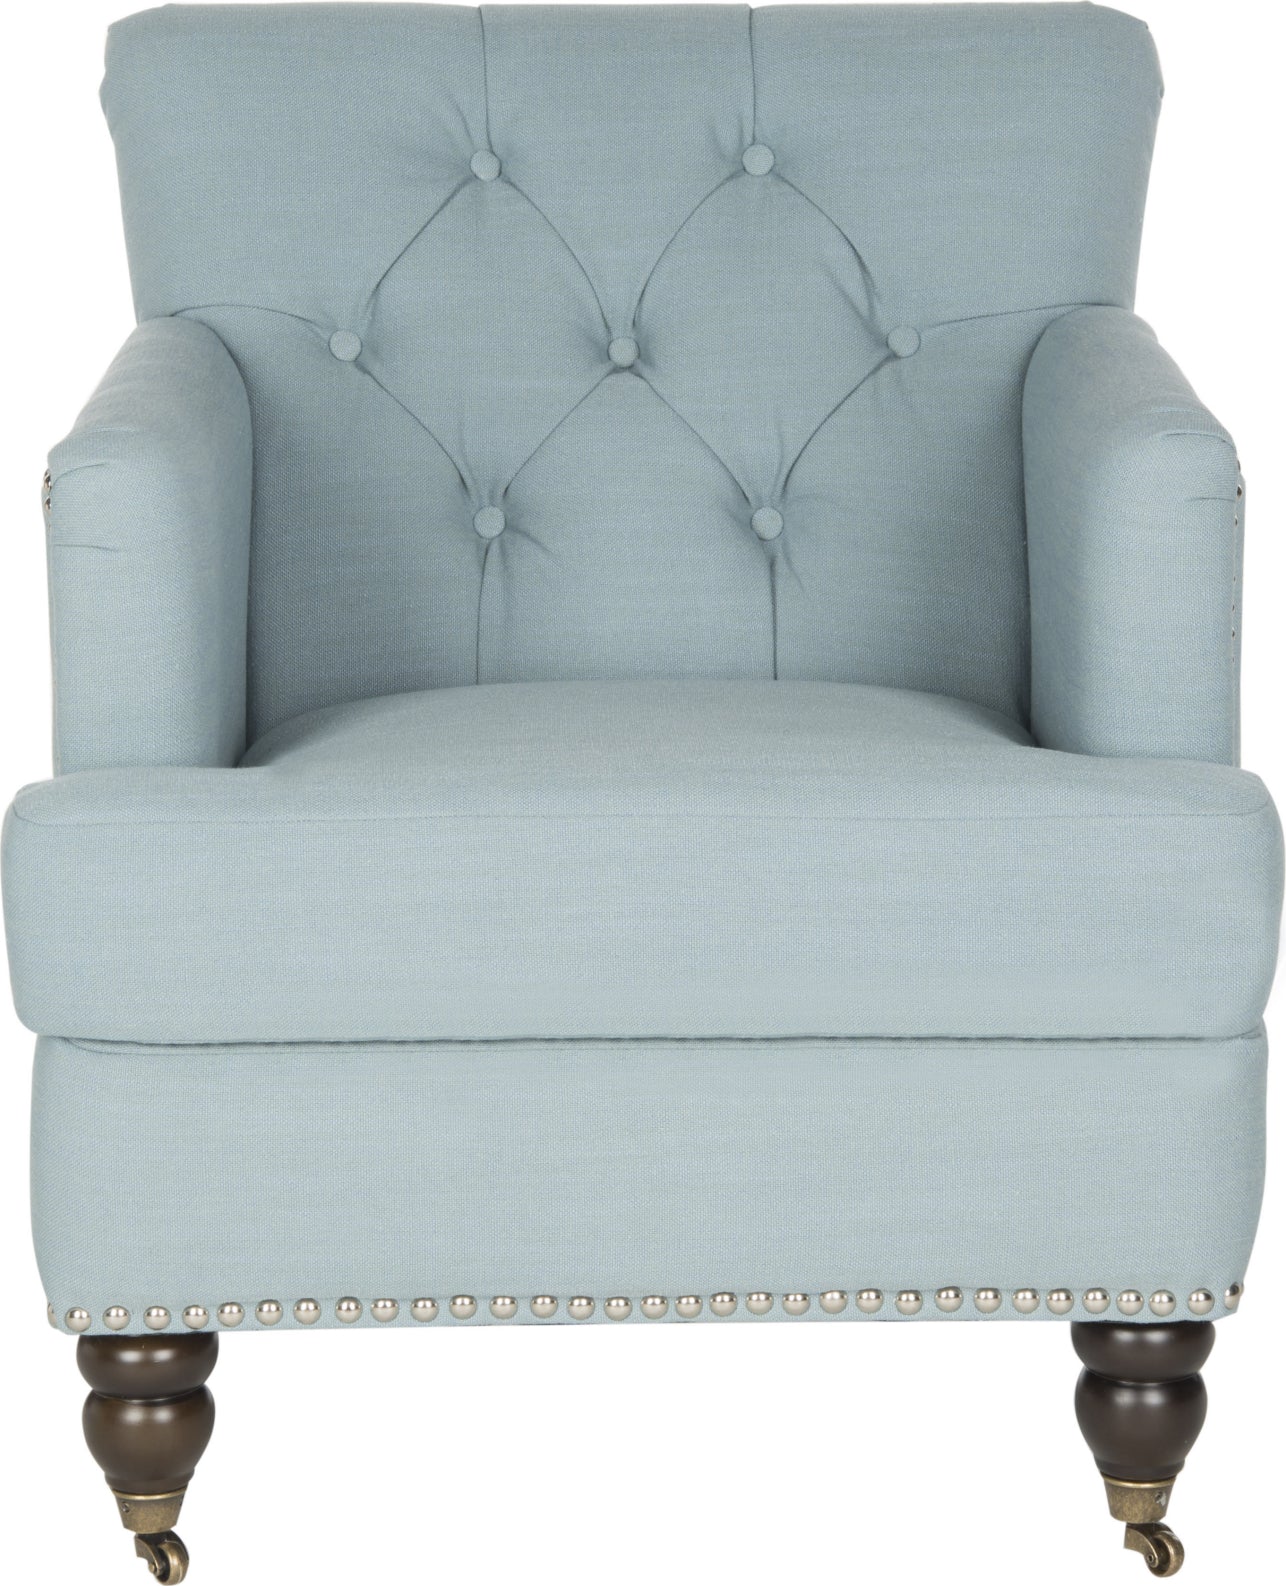 Safavieh Colin Tufted Club Chair With Brass Nail Heads Sky Blue and Dark Brown Furniture main image